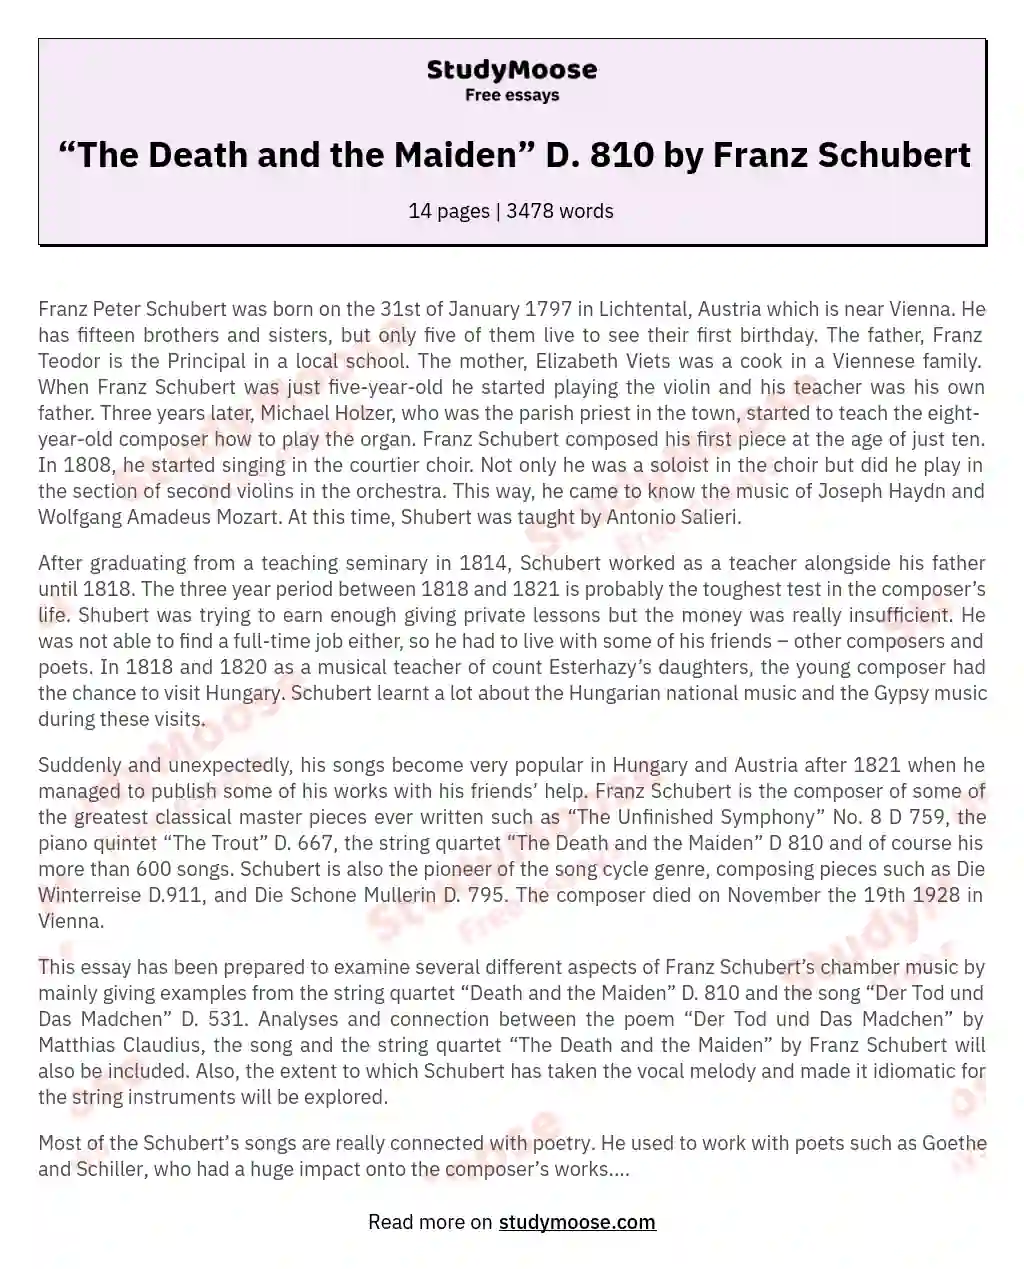 “The Death and the Maiden” D. 810 by Franz Schubert